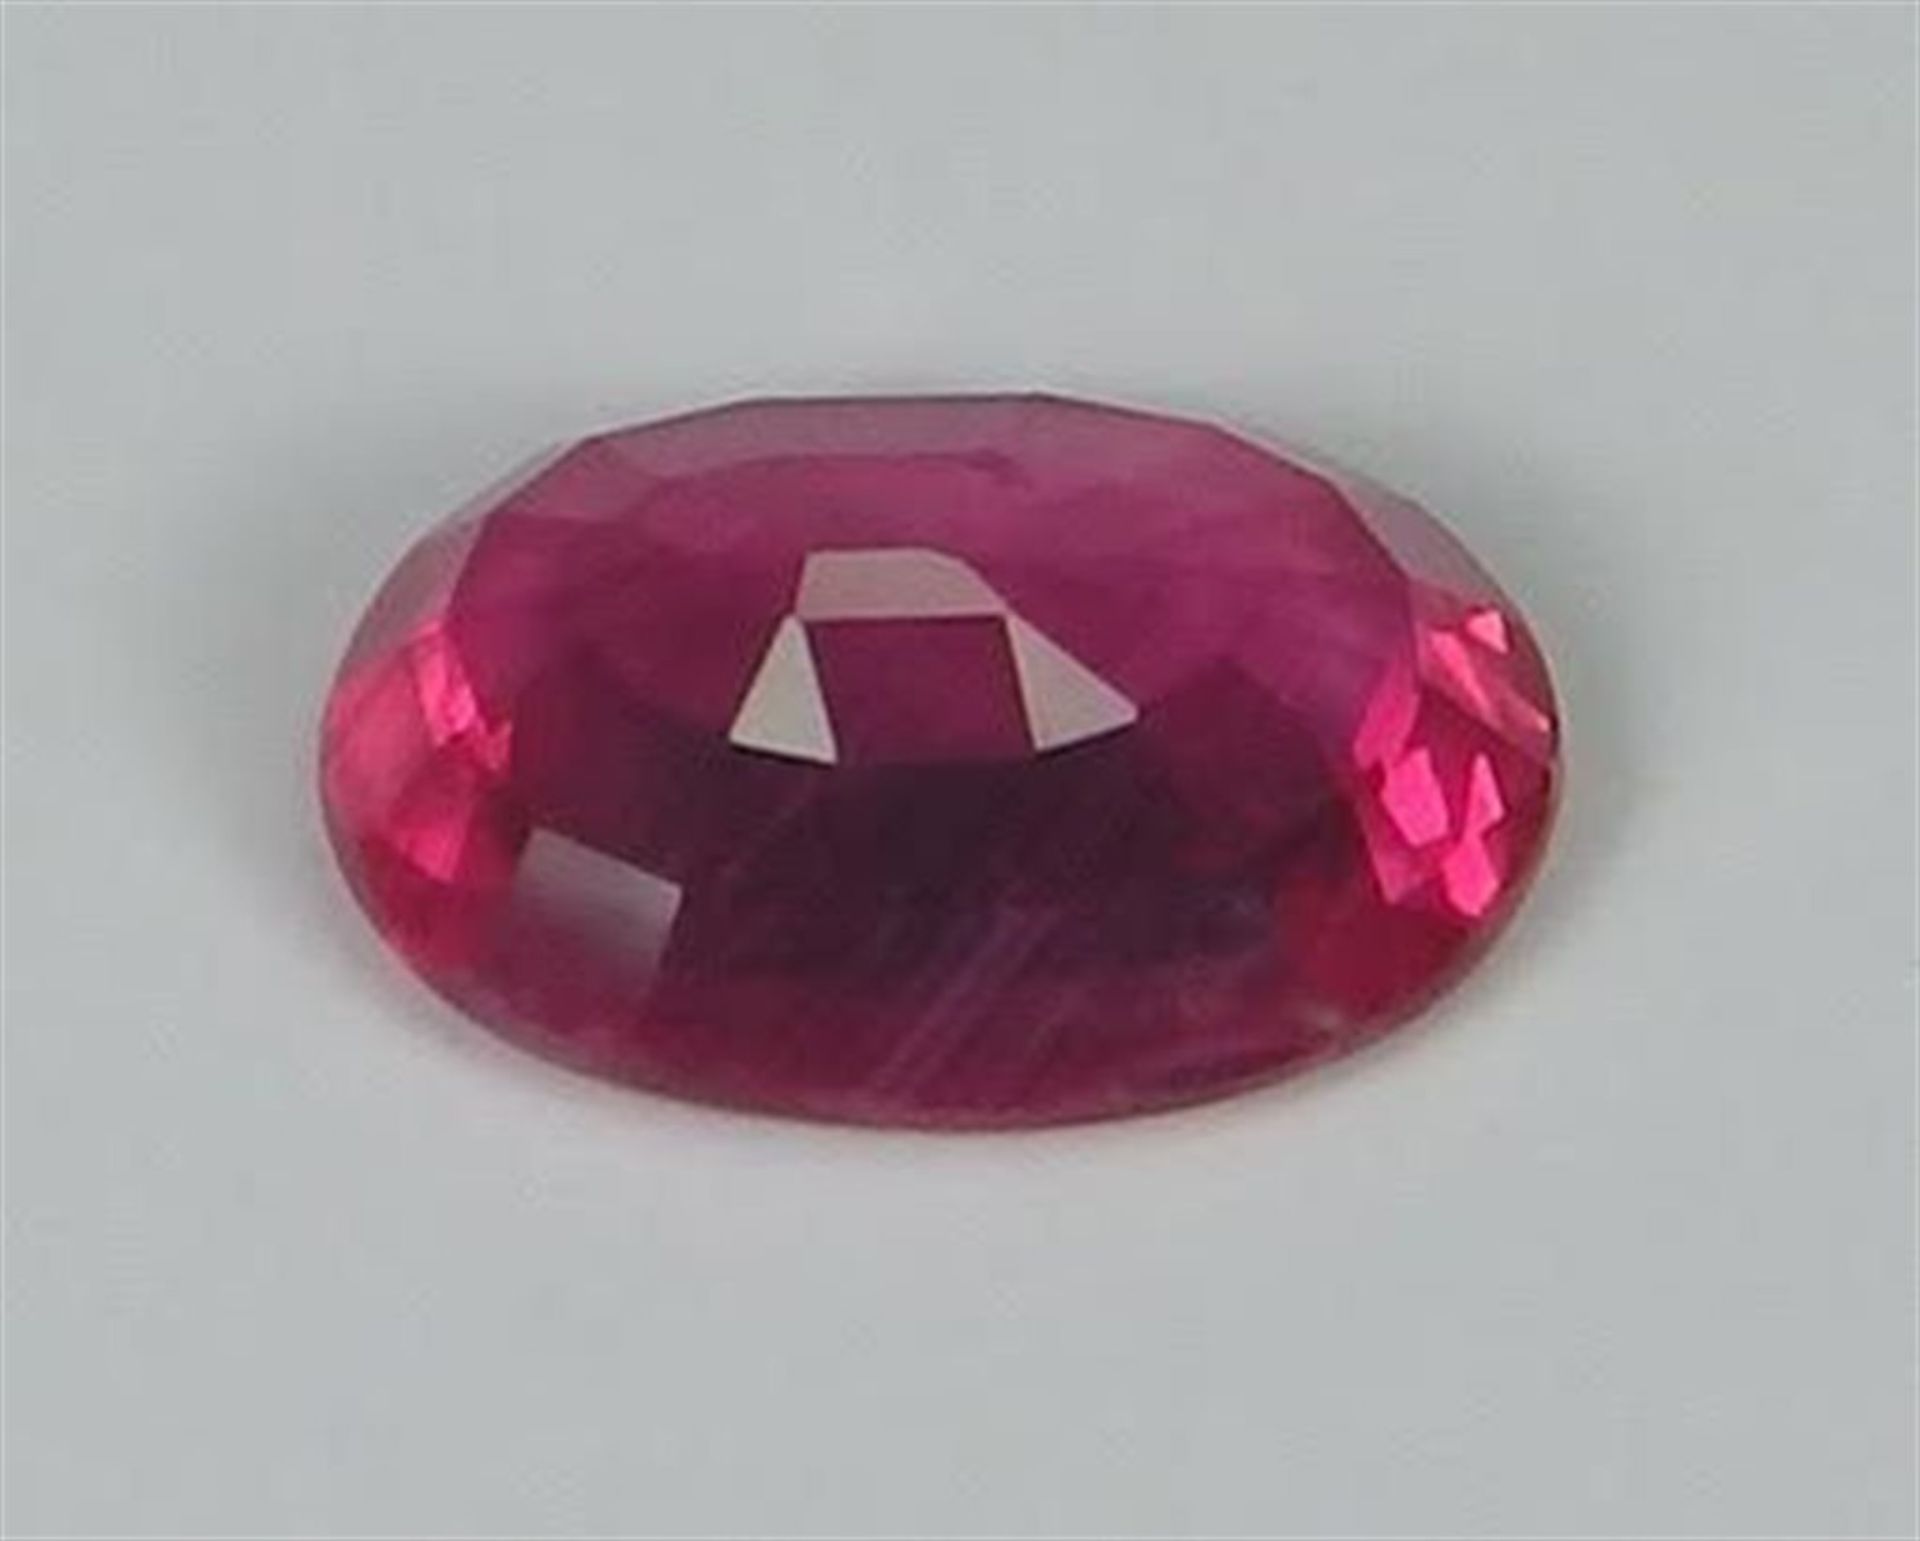 GIA Certified 1.22 ct. Untreated Ruby - BURMA - Image 10 of 10